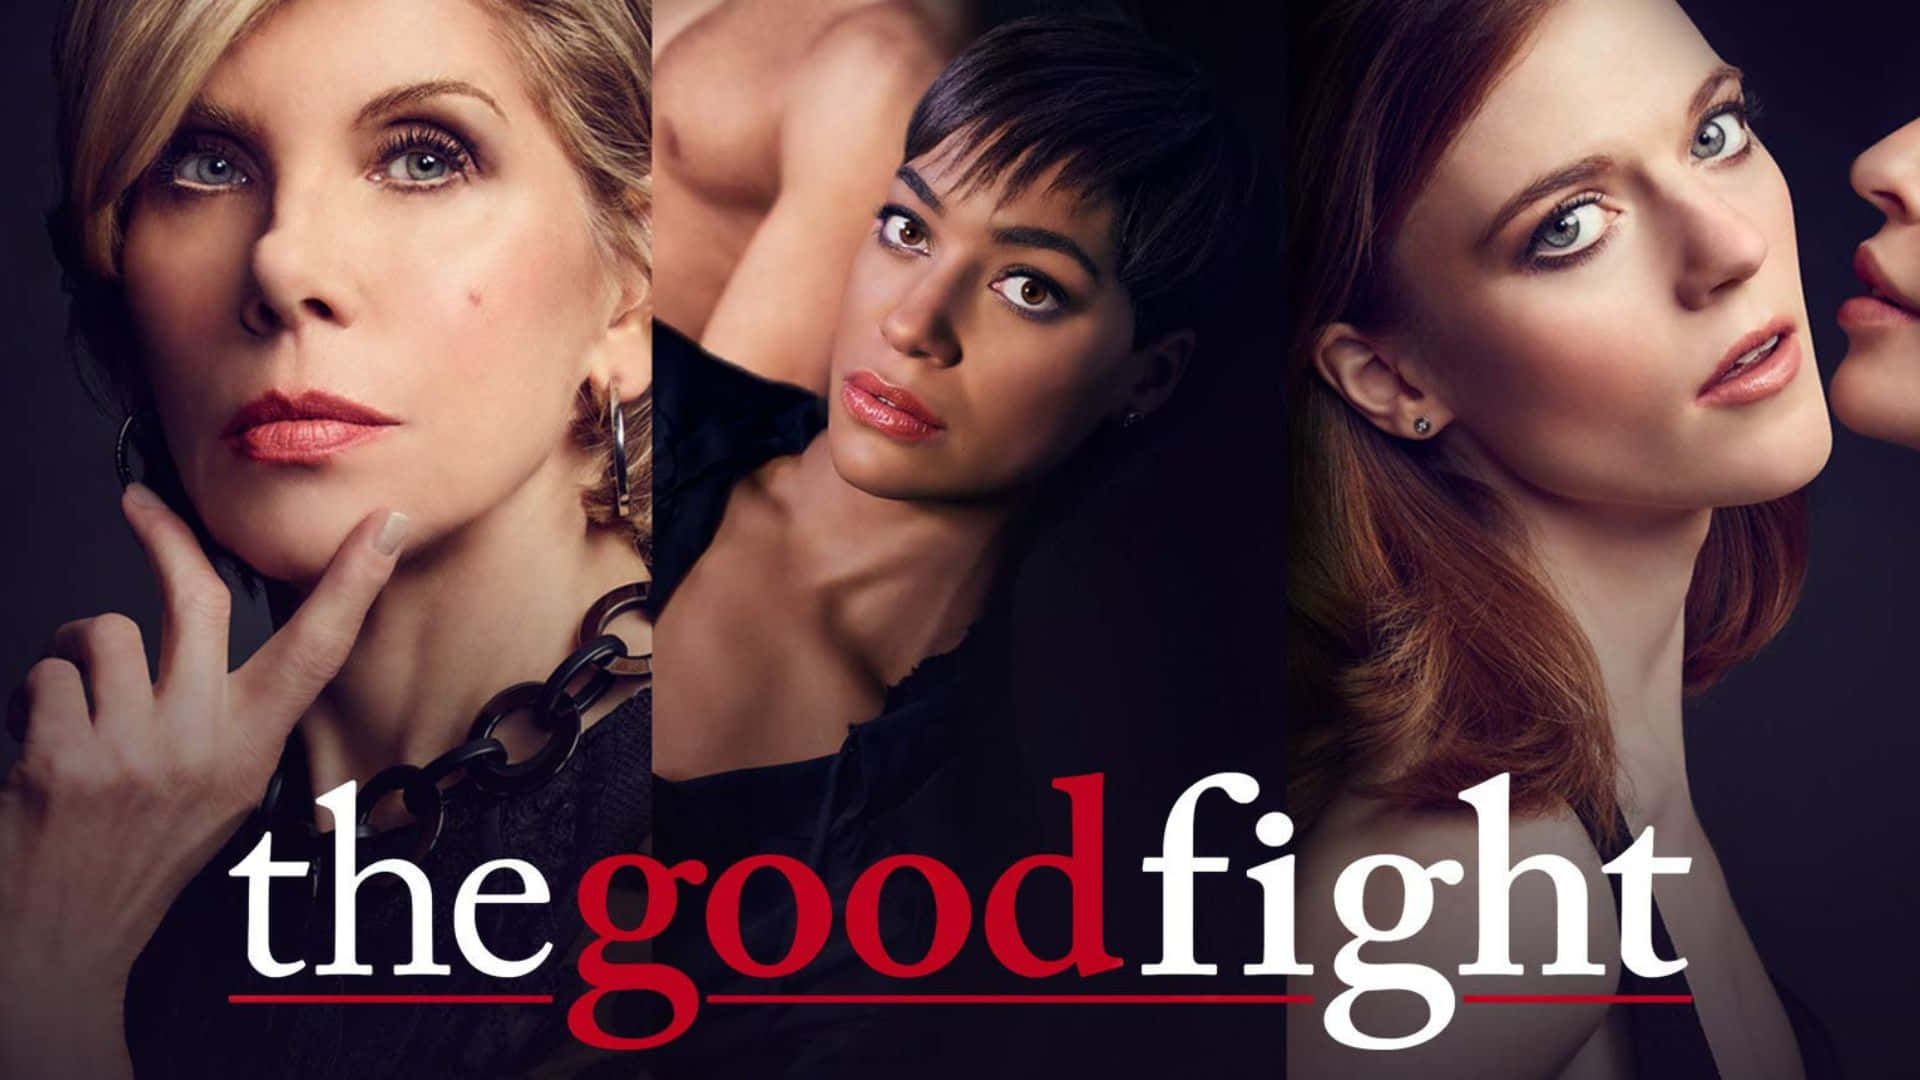 The Good Fight Cast Promotional Image Wallpaper